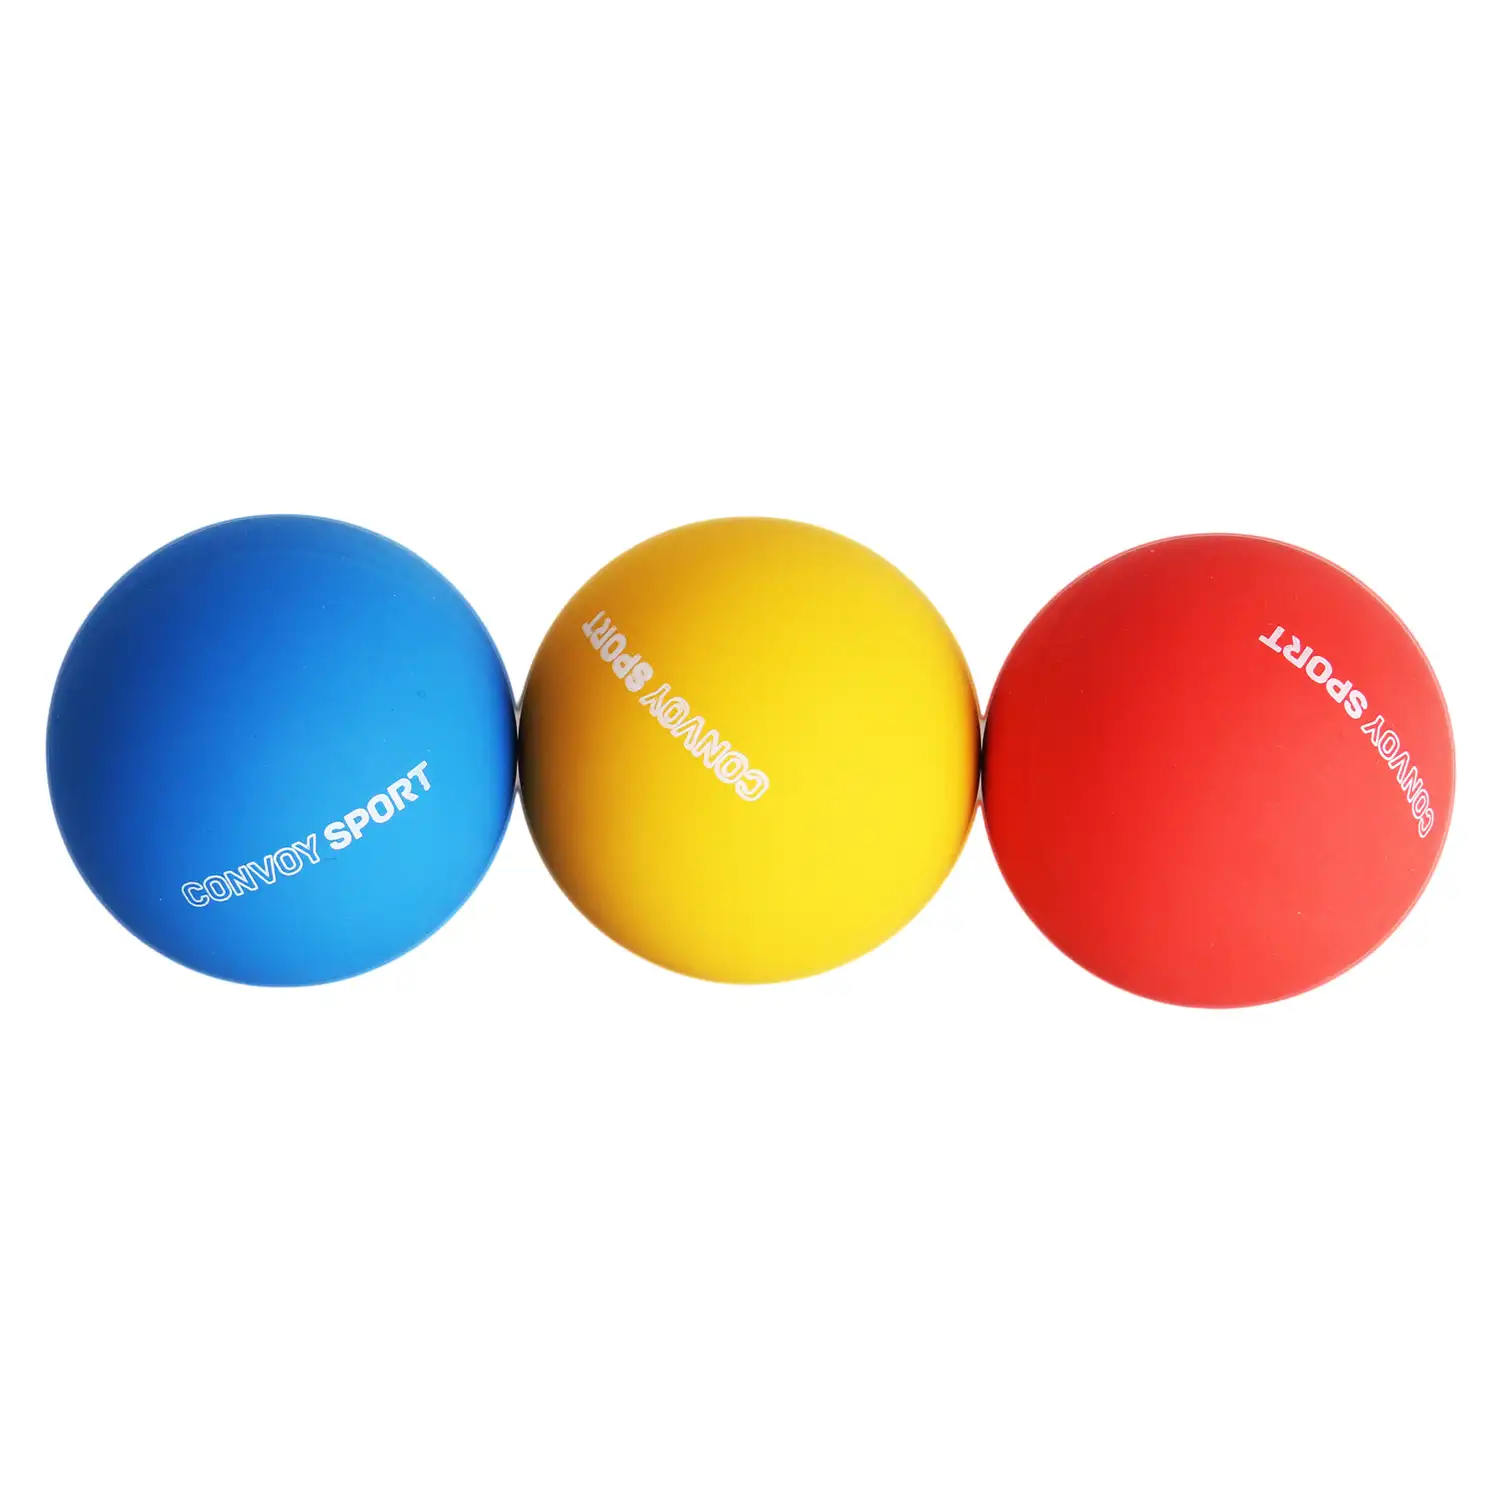 Zhejiang 2019 Hot Sale Direct Factory High Bouncy Natural Rubber Squash Ball For Entertainment